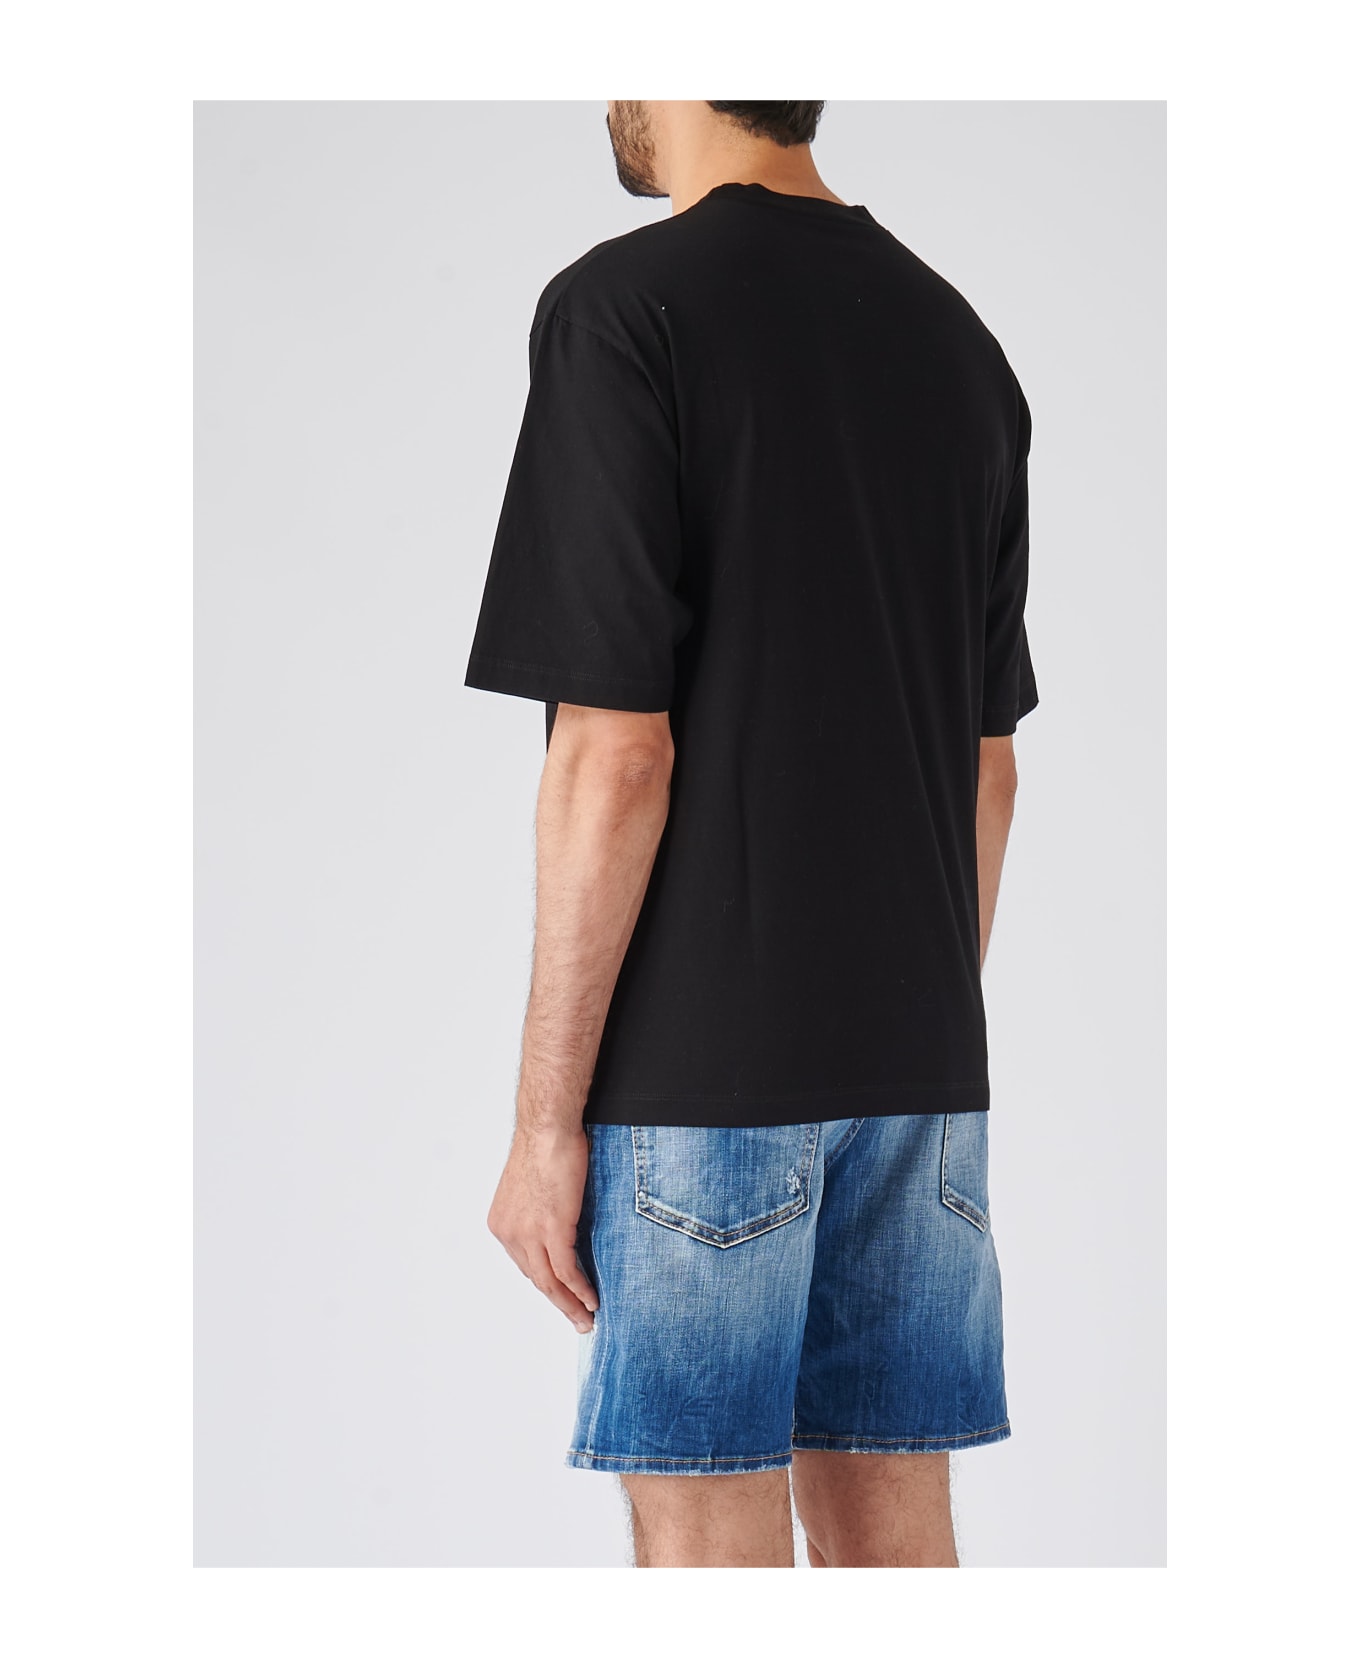 Dsquared2 Be Icon Loose Fit Tee T-shirt - NERO シャツ